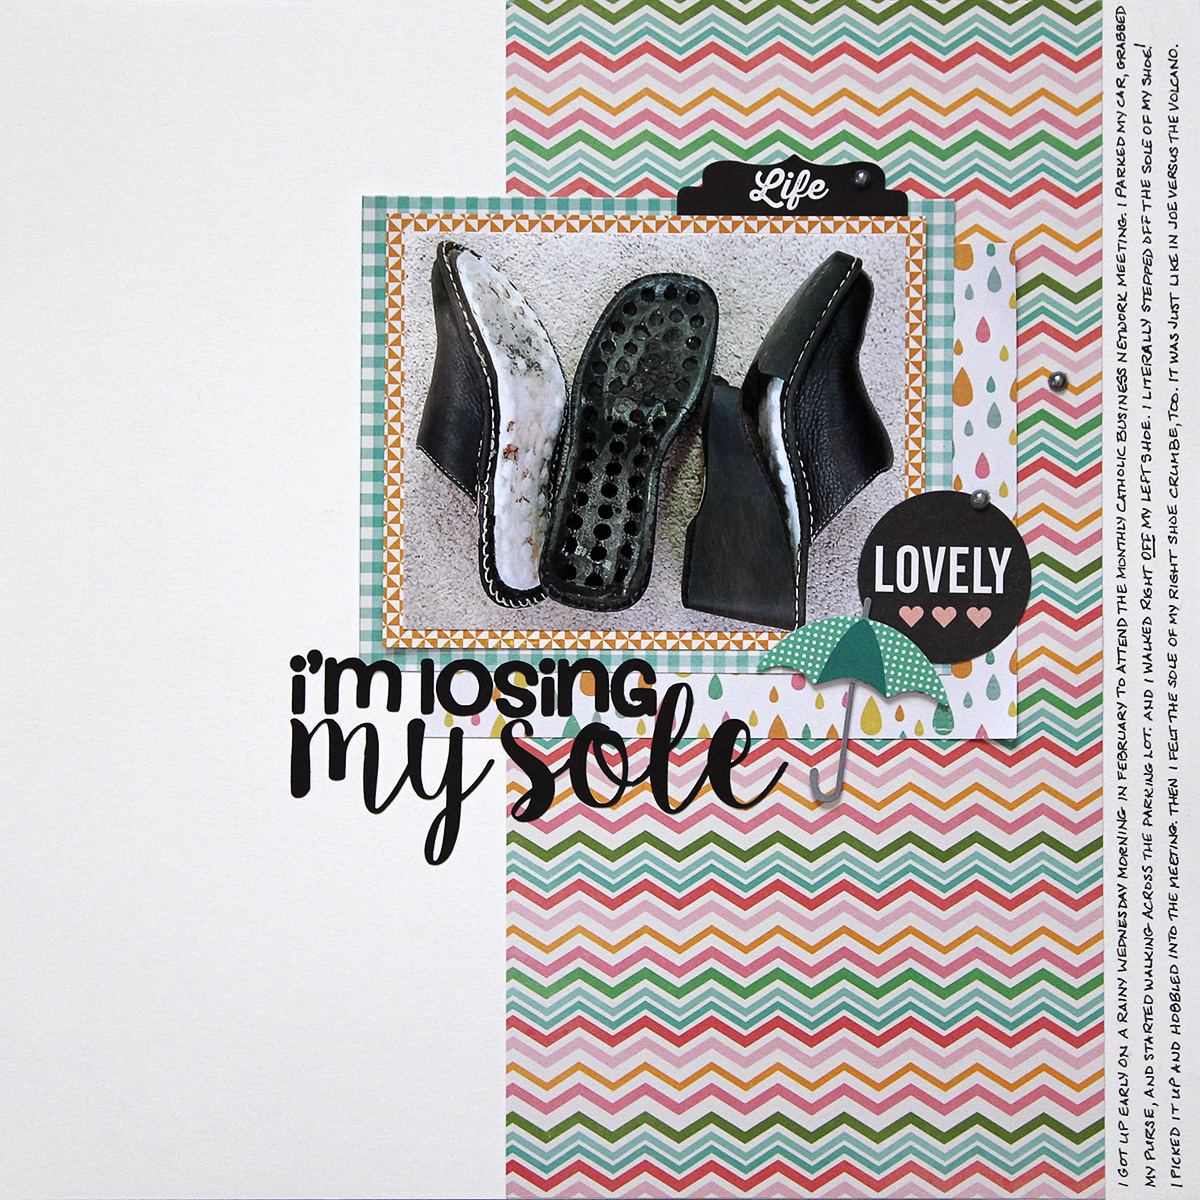 I'm losing my sole is a one-photo scrapbook page that uses supplies from Pebbles and Pink Paislee.